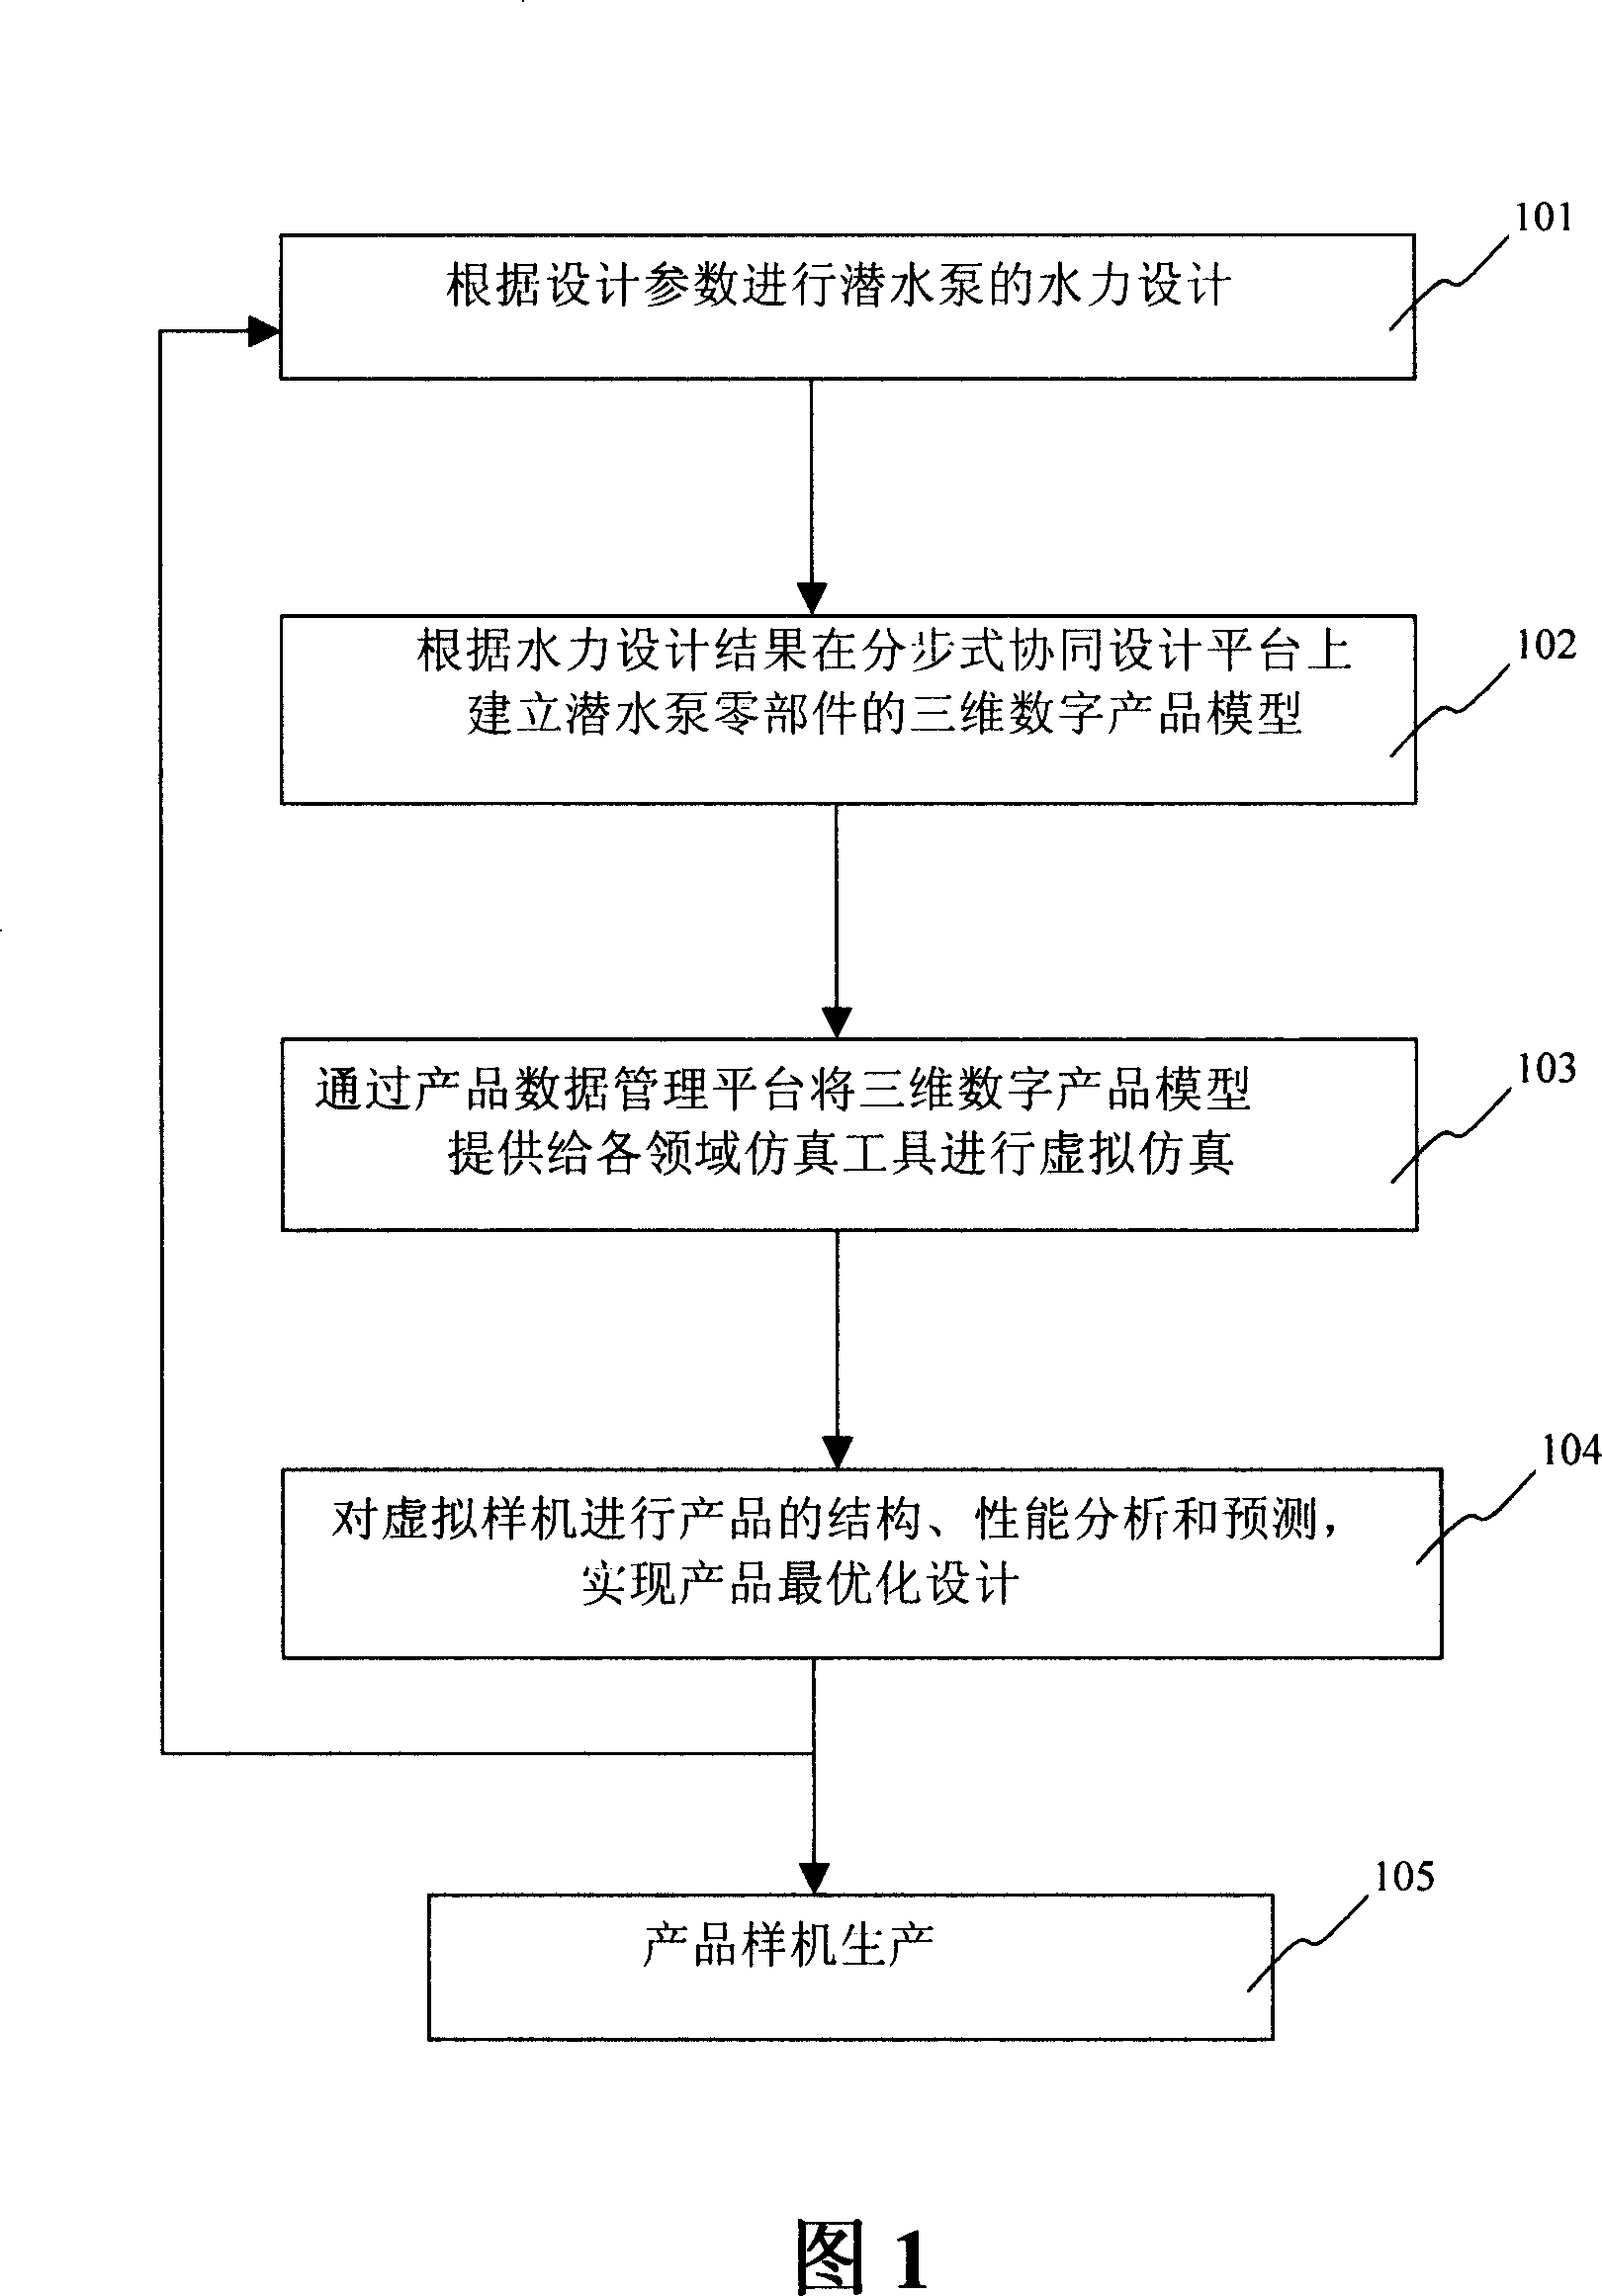 Artificial manufacturing method of submerged pump and system